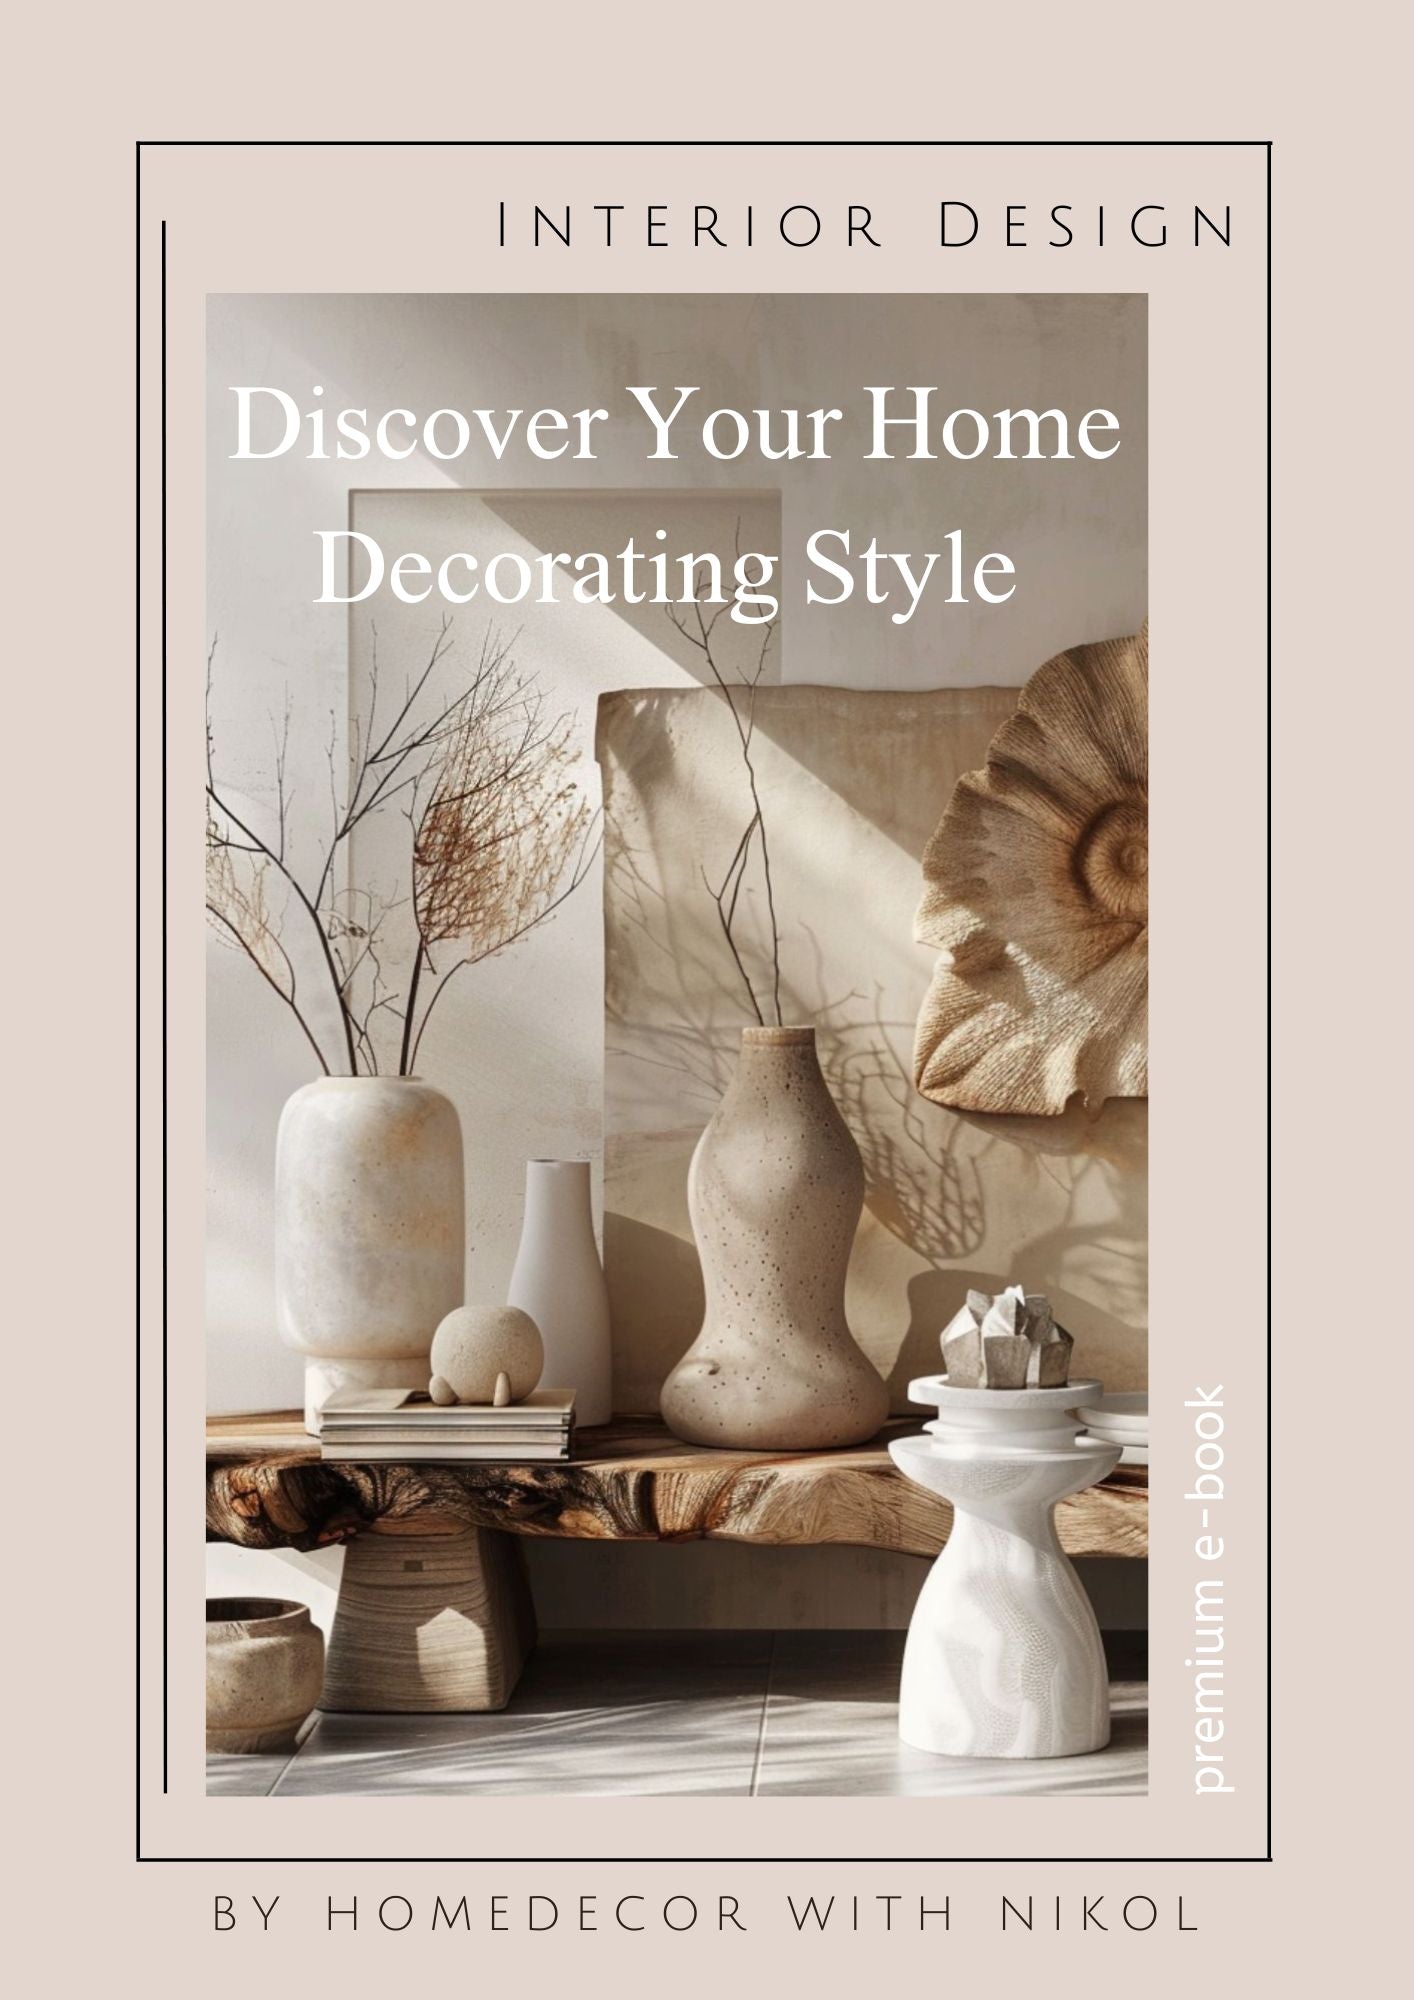 E-Book "Discover your home decorating style"